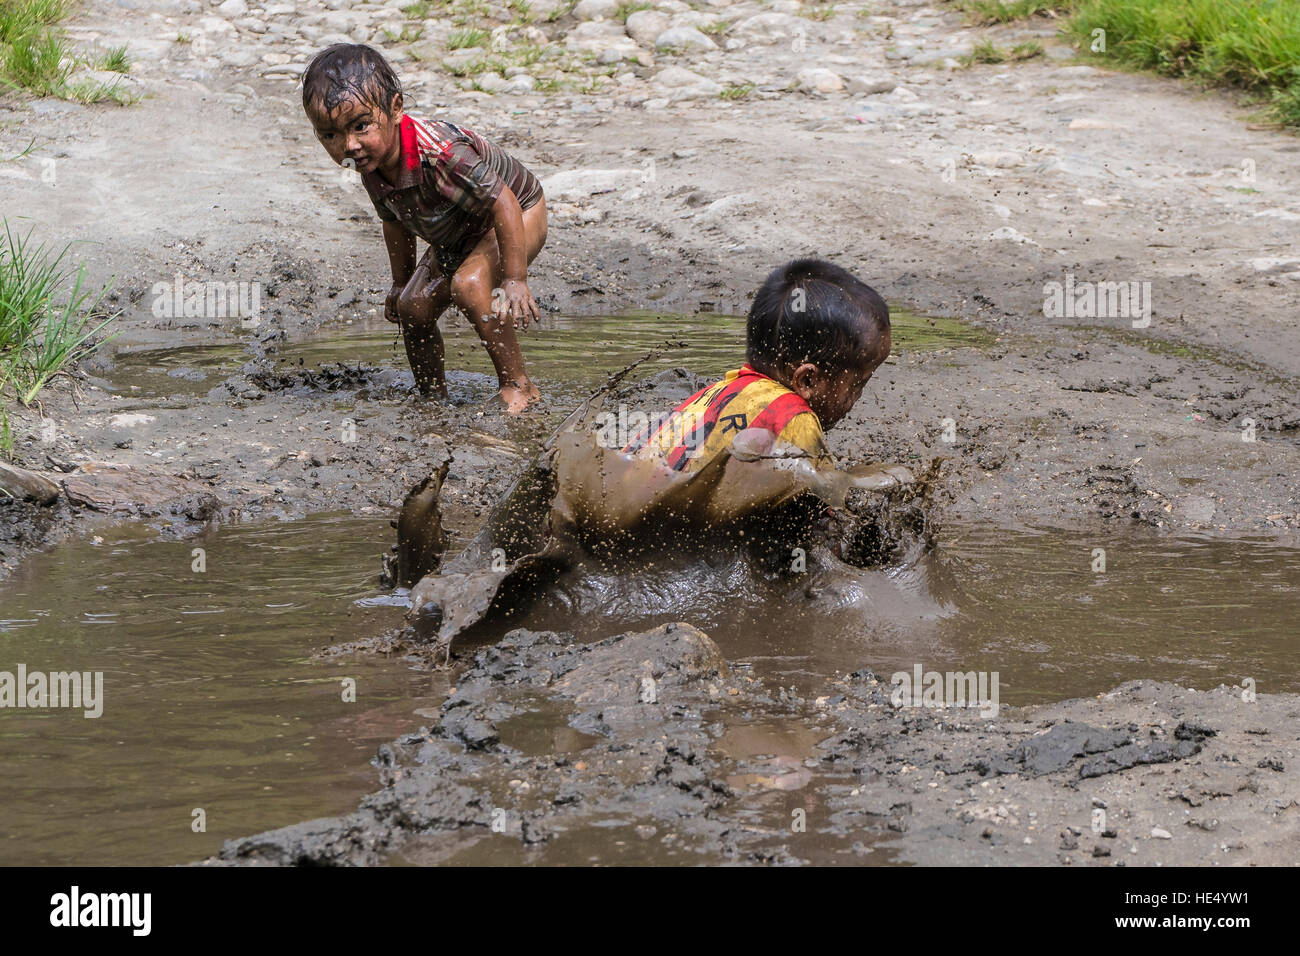 Two local boys, only wearing shirts, are playing in the mud of a waterhole Stock Photo